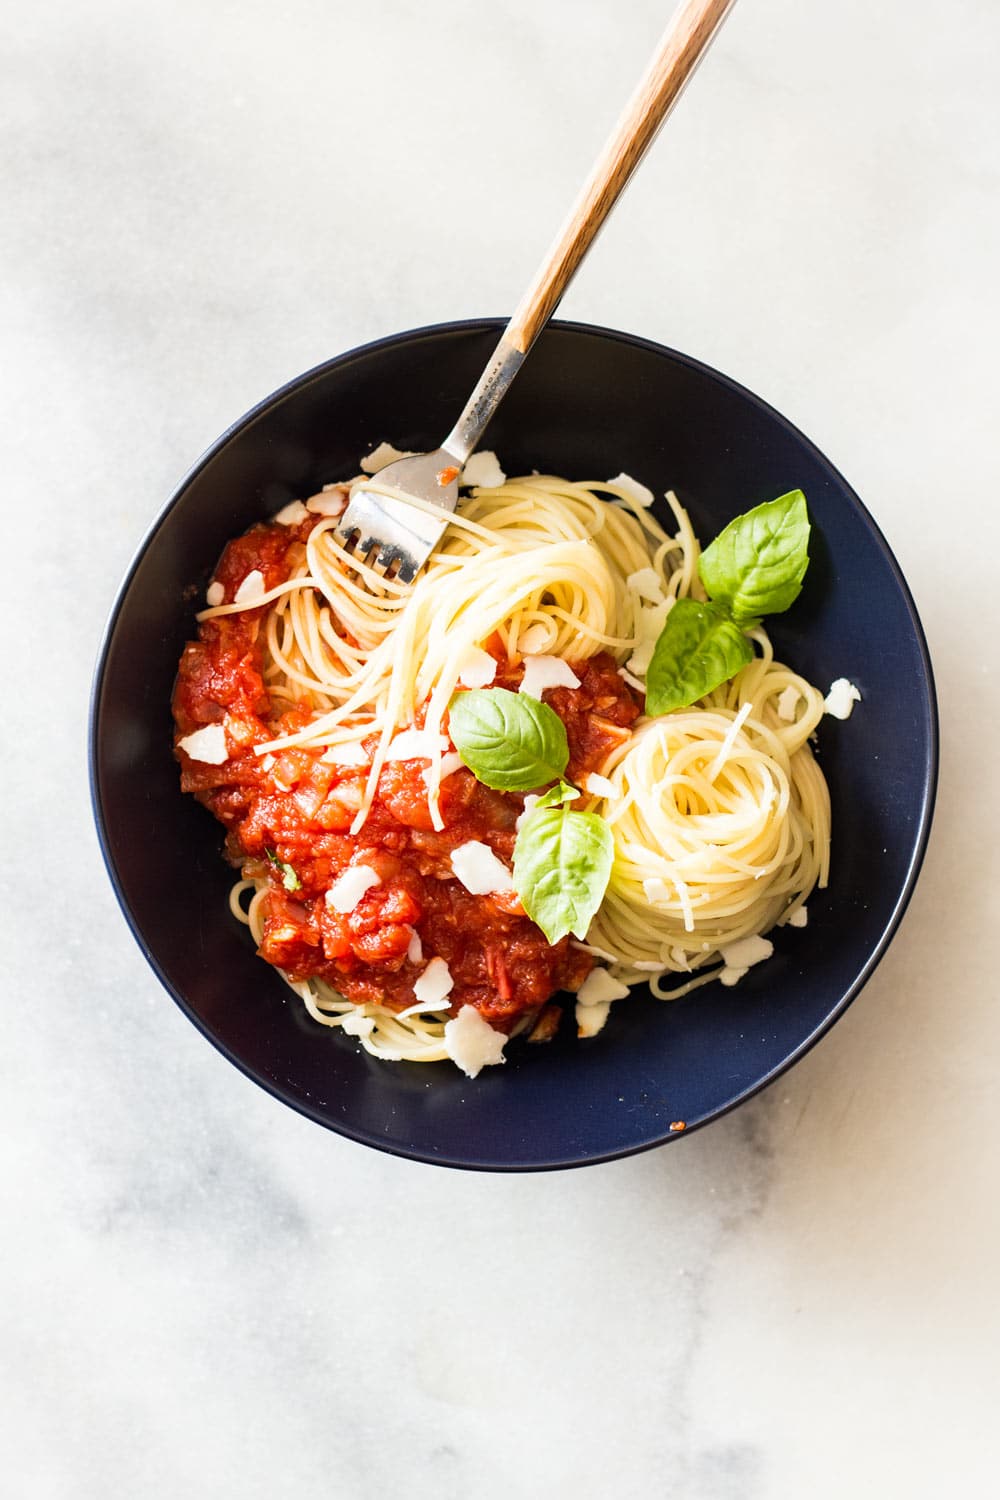 Capellini pasta topped with Roasted Garlic Tomato Sauce, garnished with fresh basil leaves, in a black bowl with a fork.